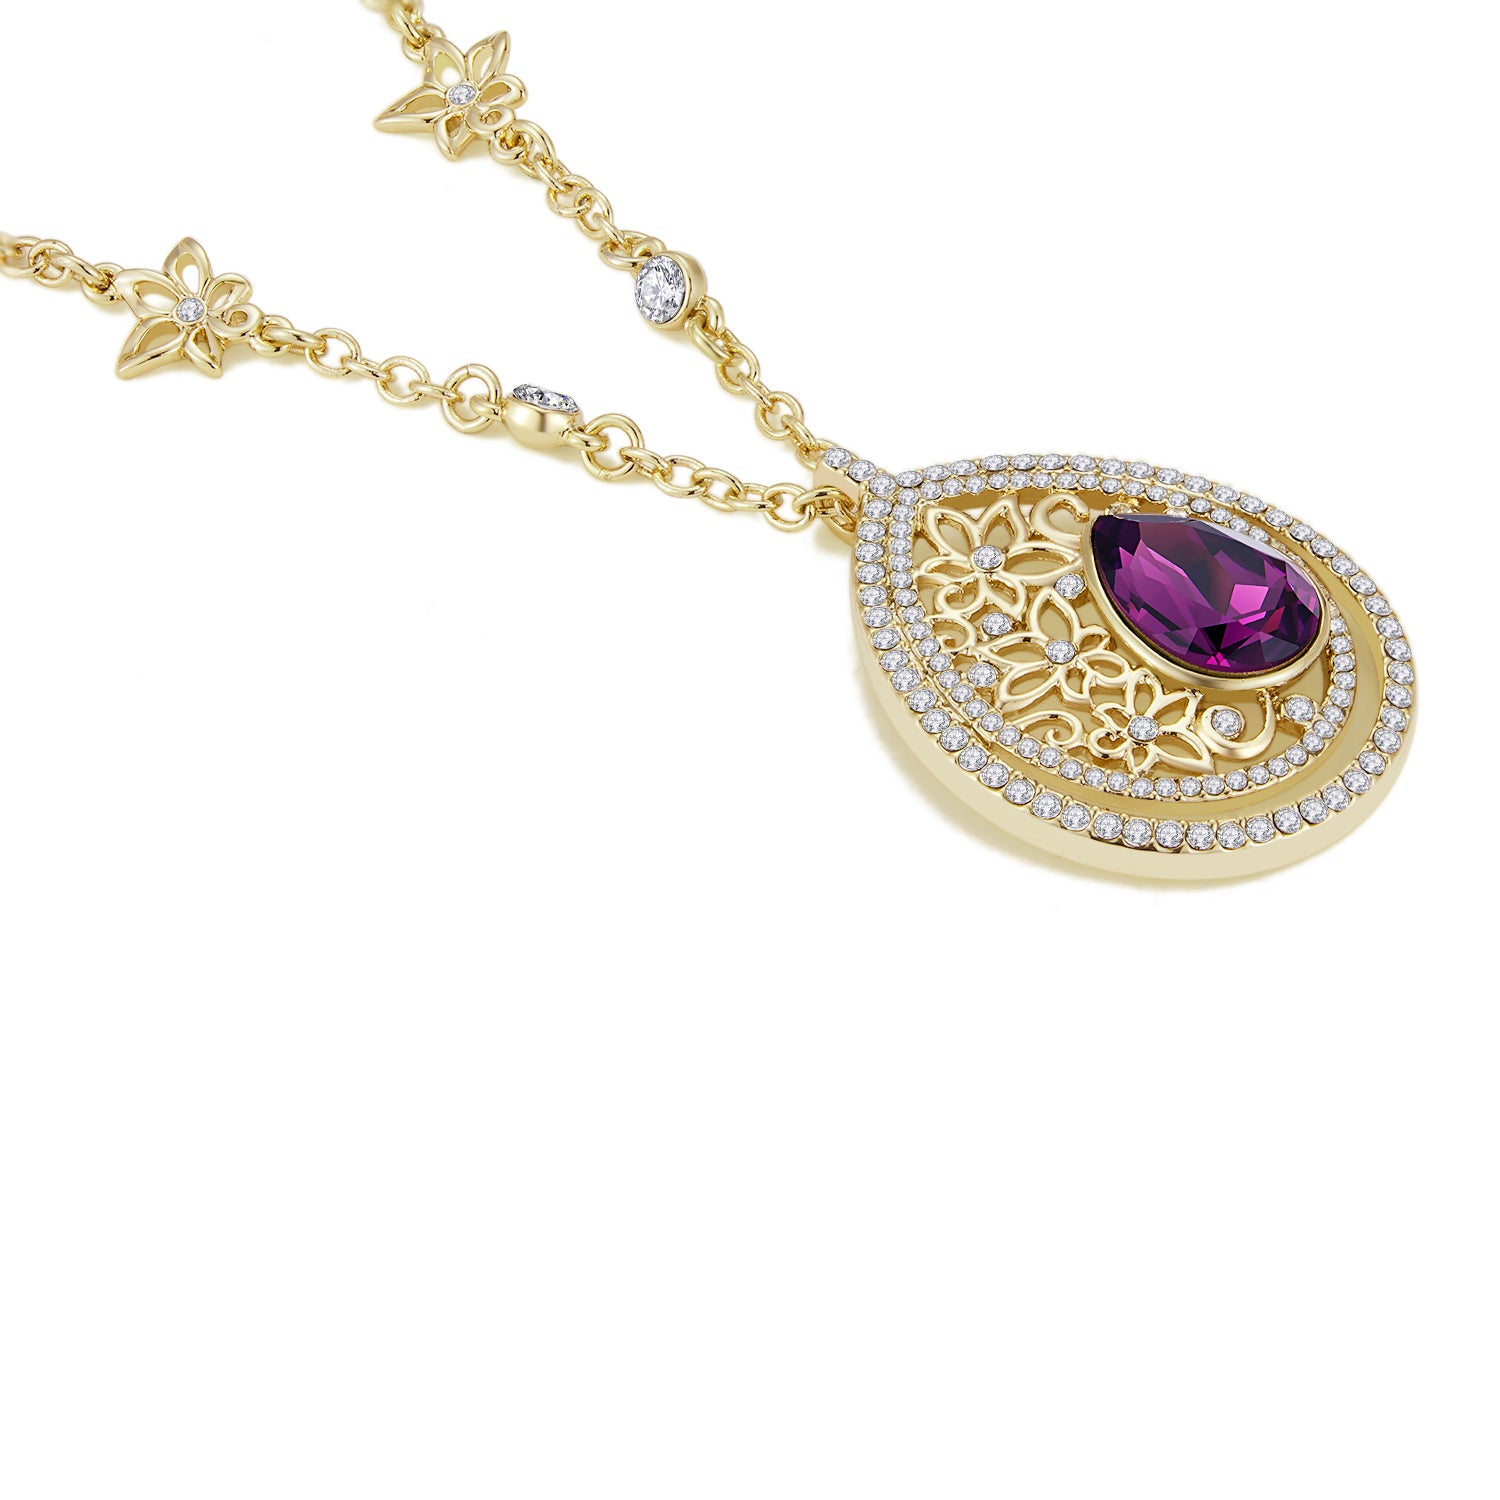 Purple Vicacci Teardrop necklace,Embellished with crystals from Swarovski